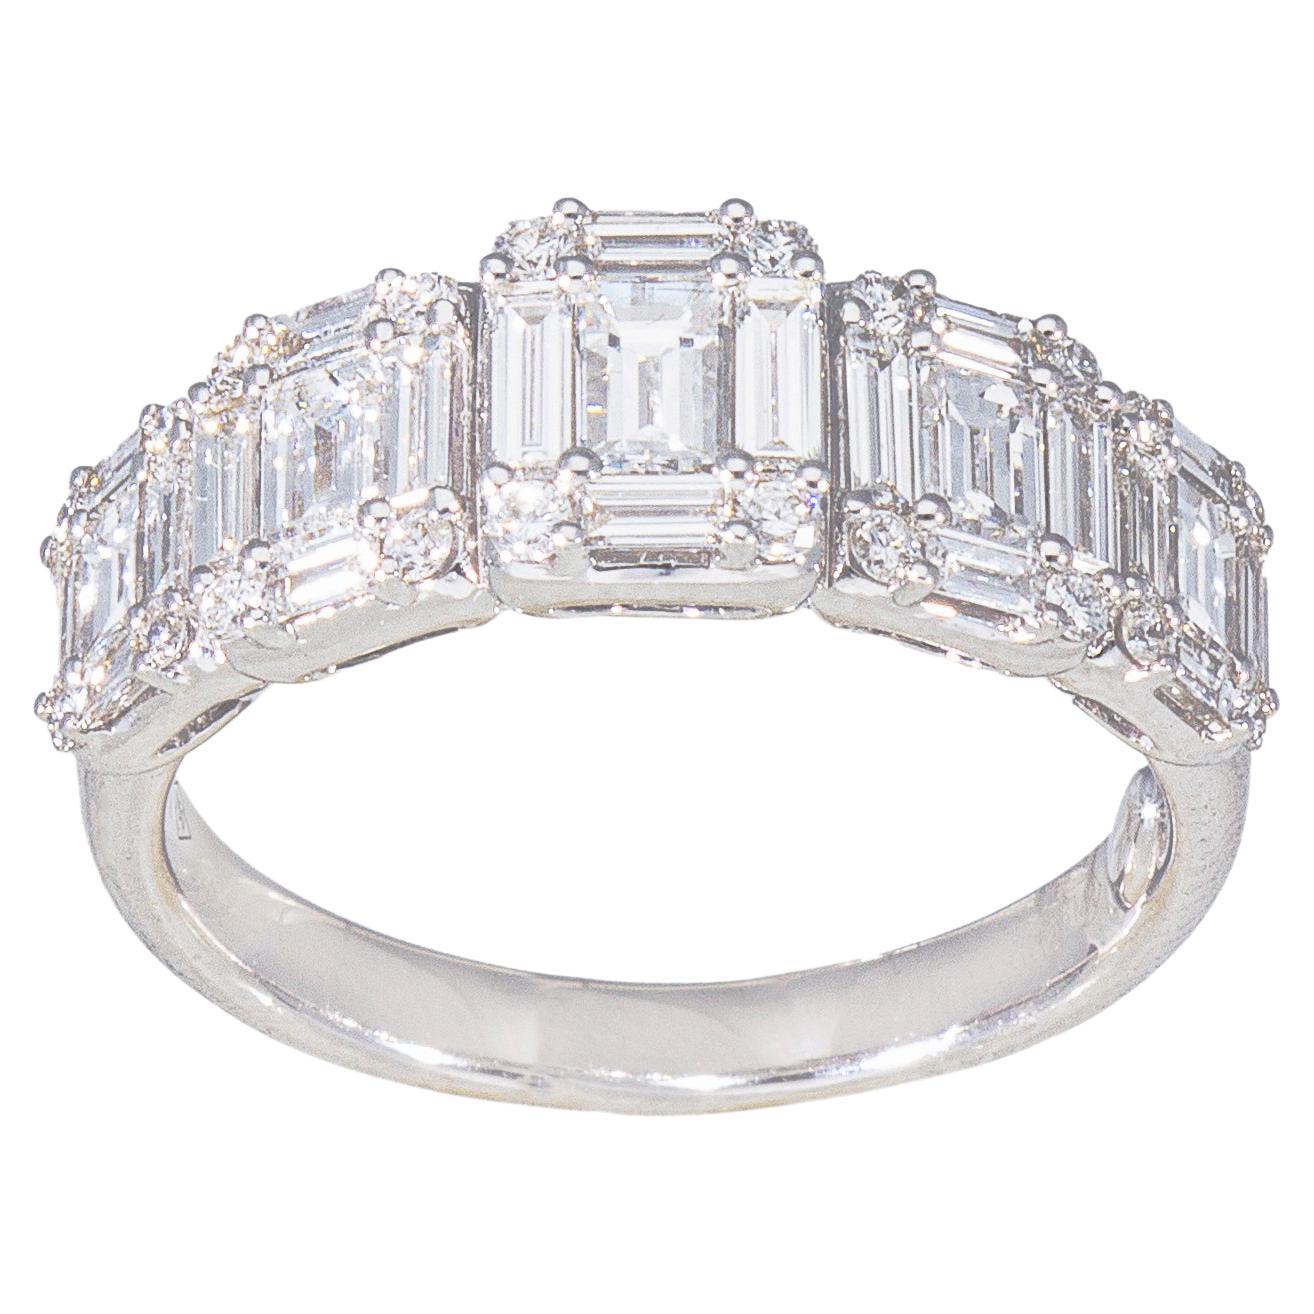 Band Engagement Ring Ct 1.47 of Brilliant and Baguette Cut Diamonds For Sale